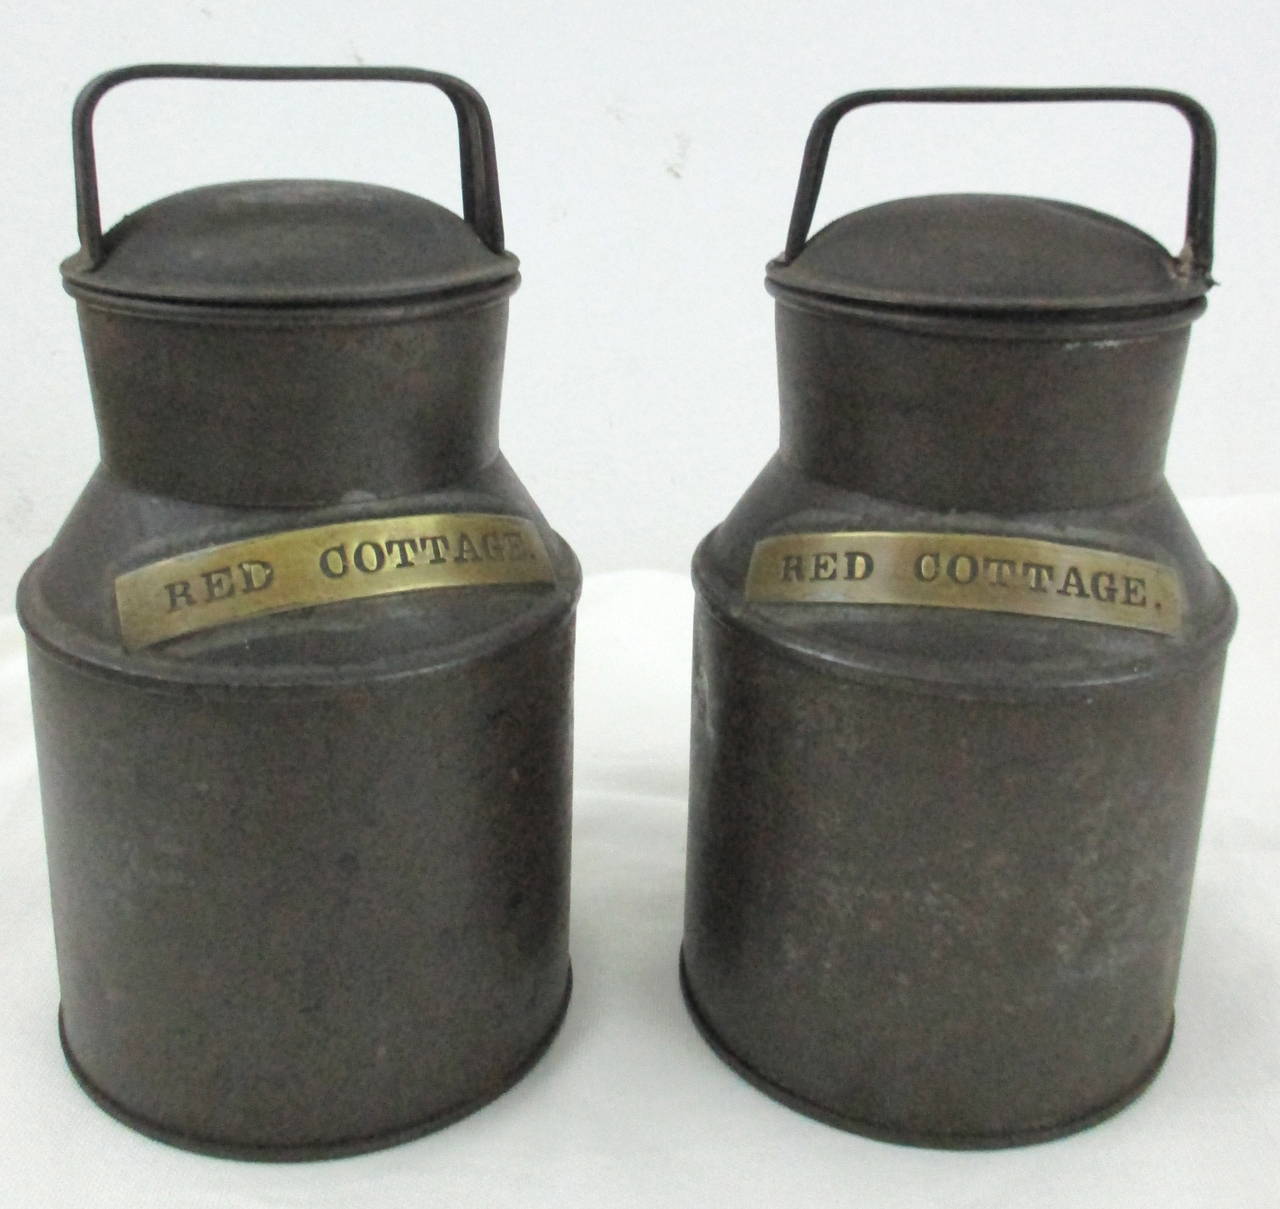 Charming pair of tin cream jugs of classic form with brass tag reading 